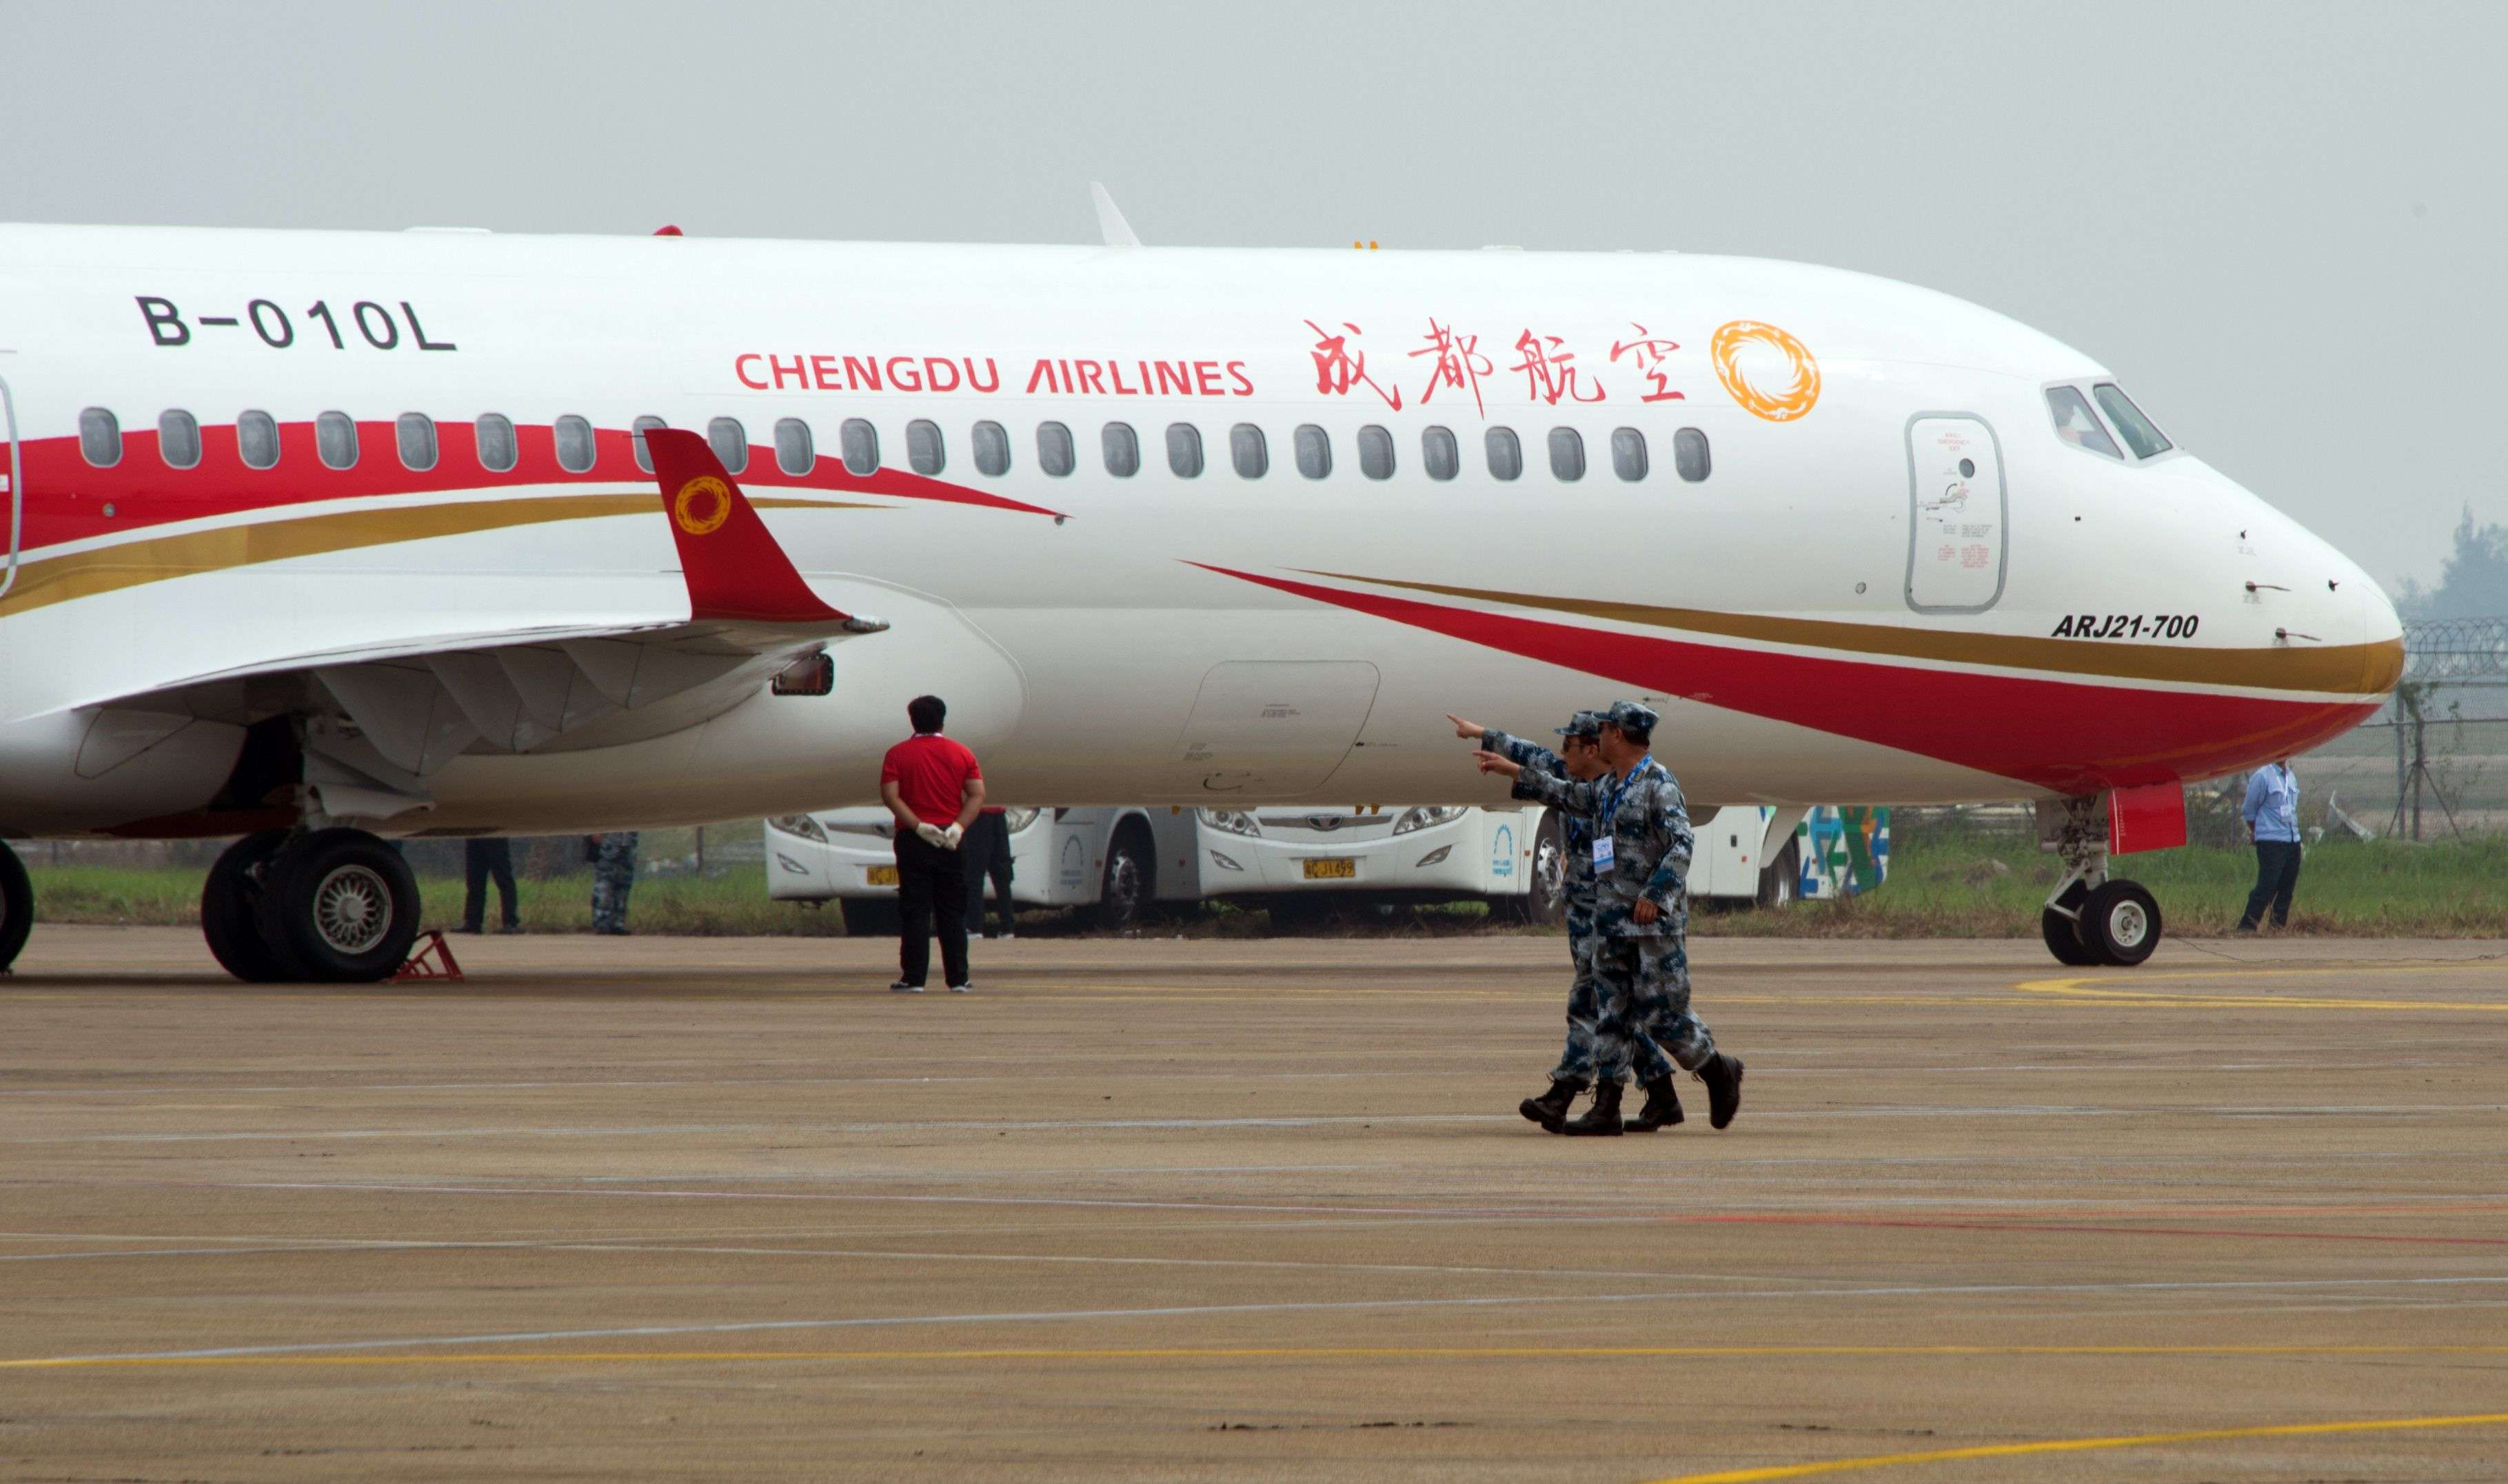 An ARJ21-700 in the livery of Chengdu Airlines, its launch customer. Photo: Johannes Eisele, AFP.